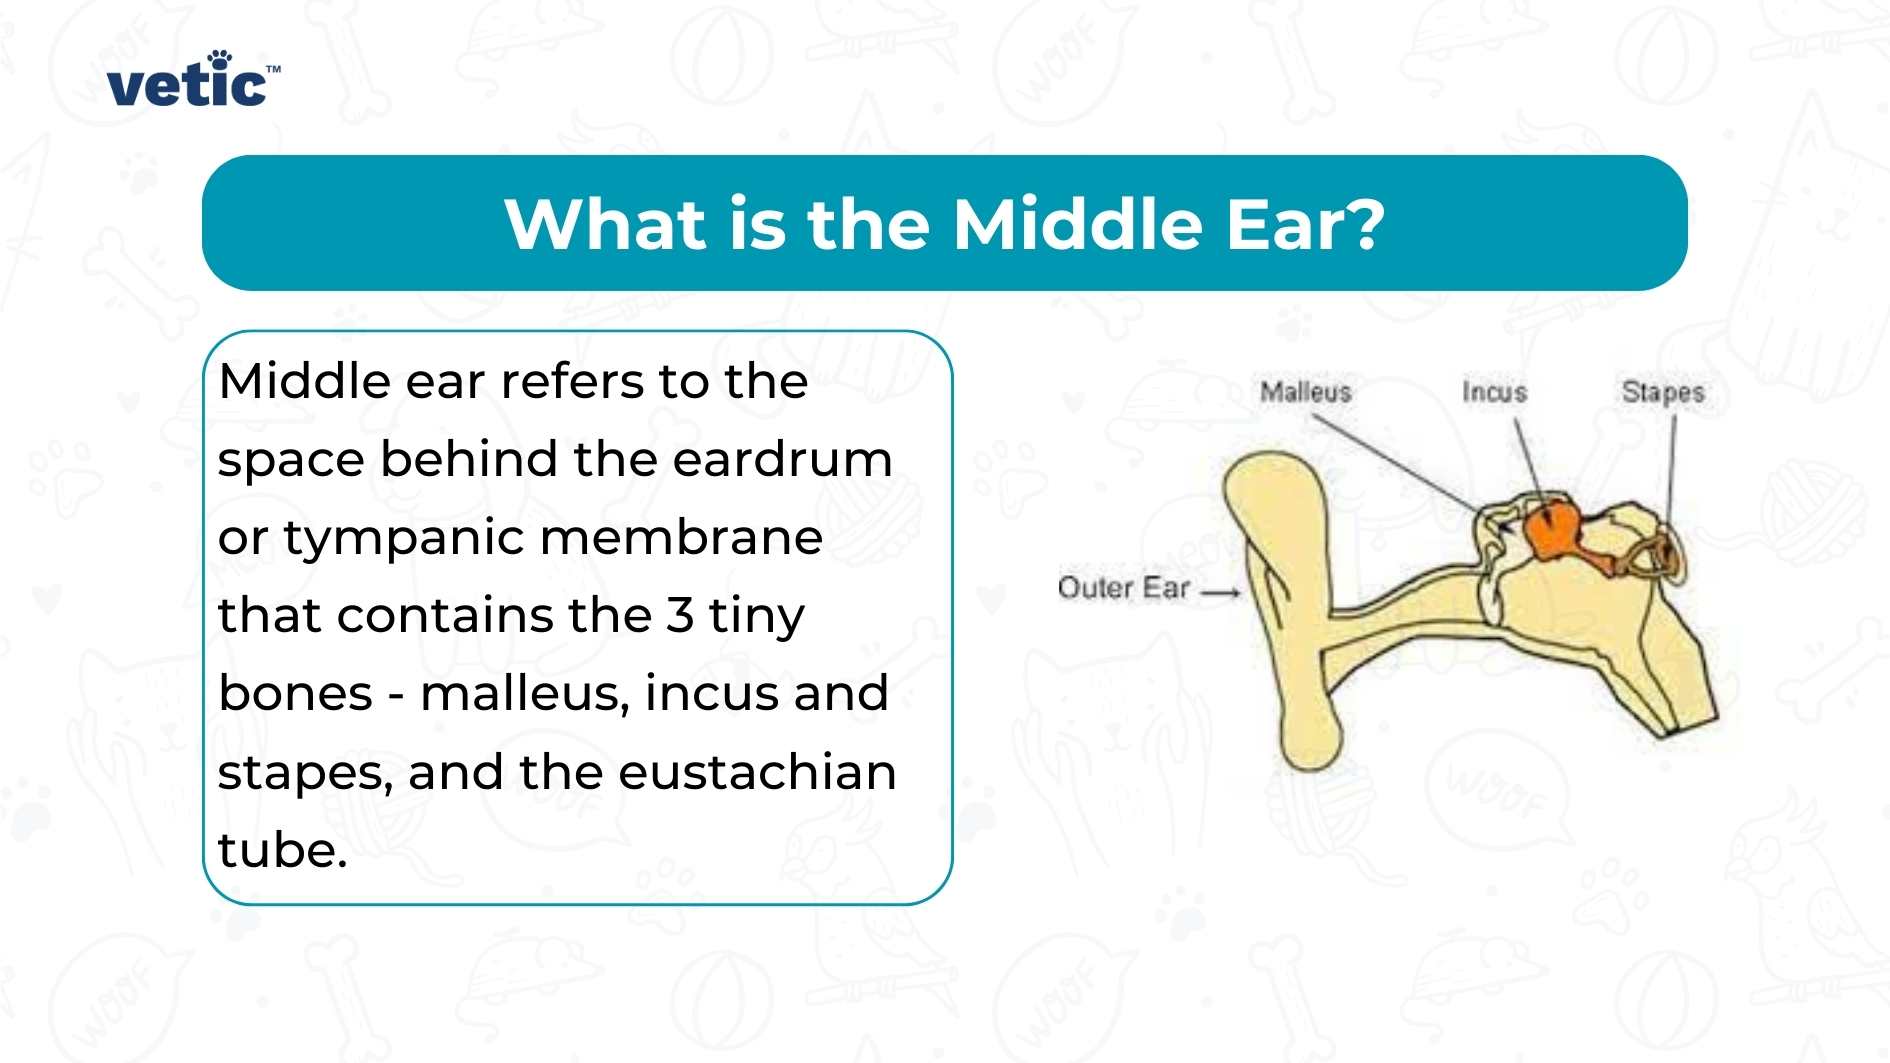 An informative diagram of the middle ear structure. The image contains text that reads: ‘What is the Middle Ear? Middle ear refers to the space behind the eardrum or tympanic membrane that contains the 3 tiny bones - malleus, incus and stapes, and the eustachian tube.’ This image provides a clear explanation of what constitutes the middle ear with a labeled diagram for visual aid, making complex biological information easily understandable.